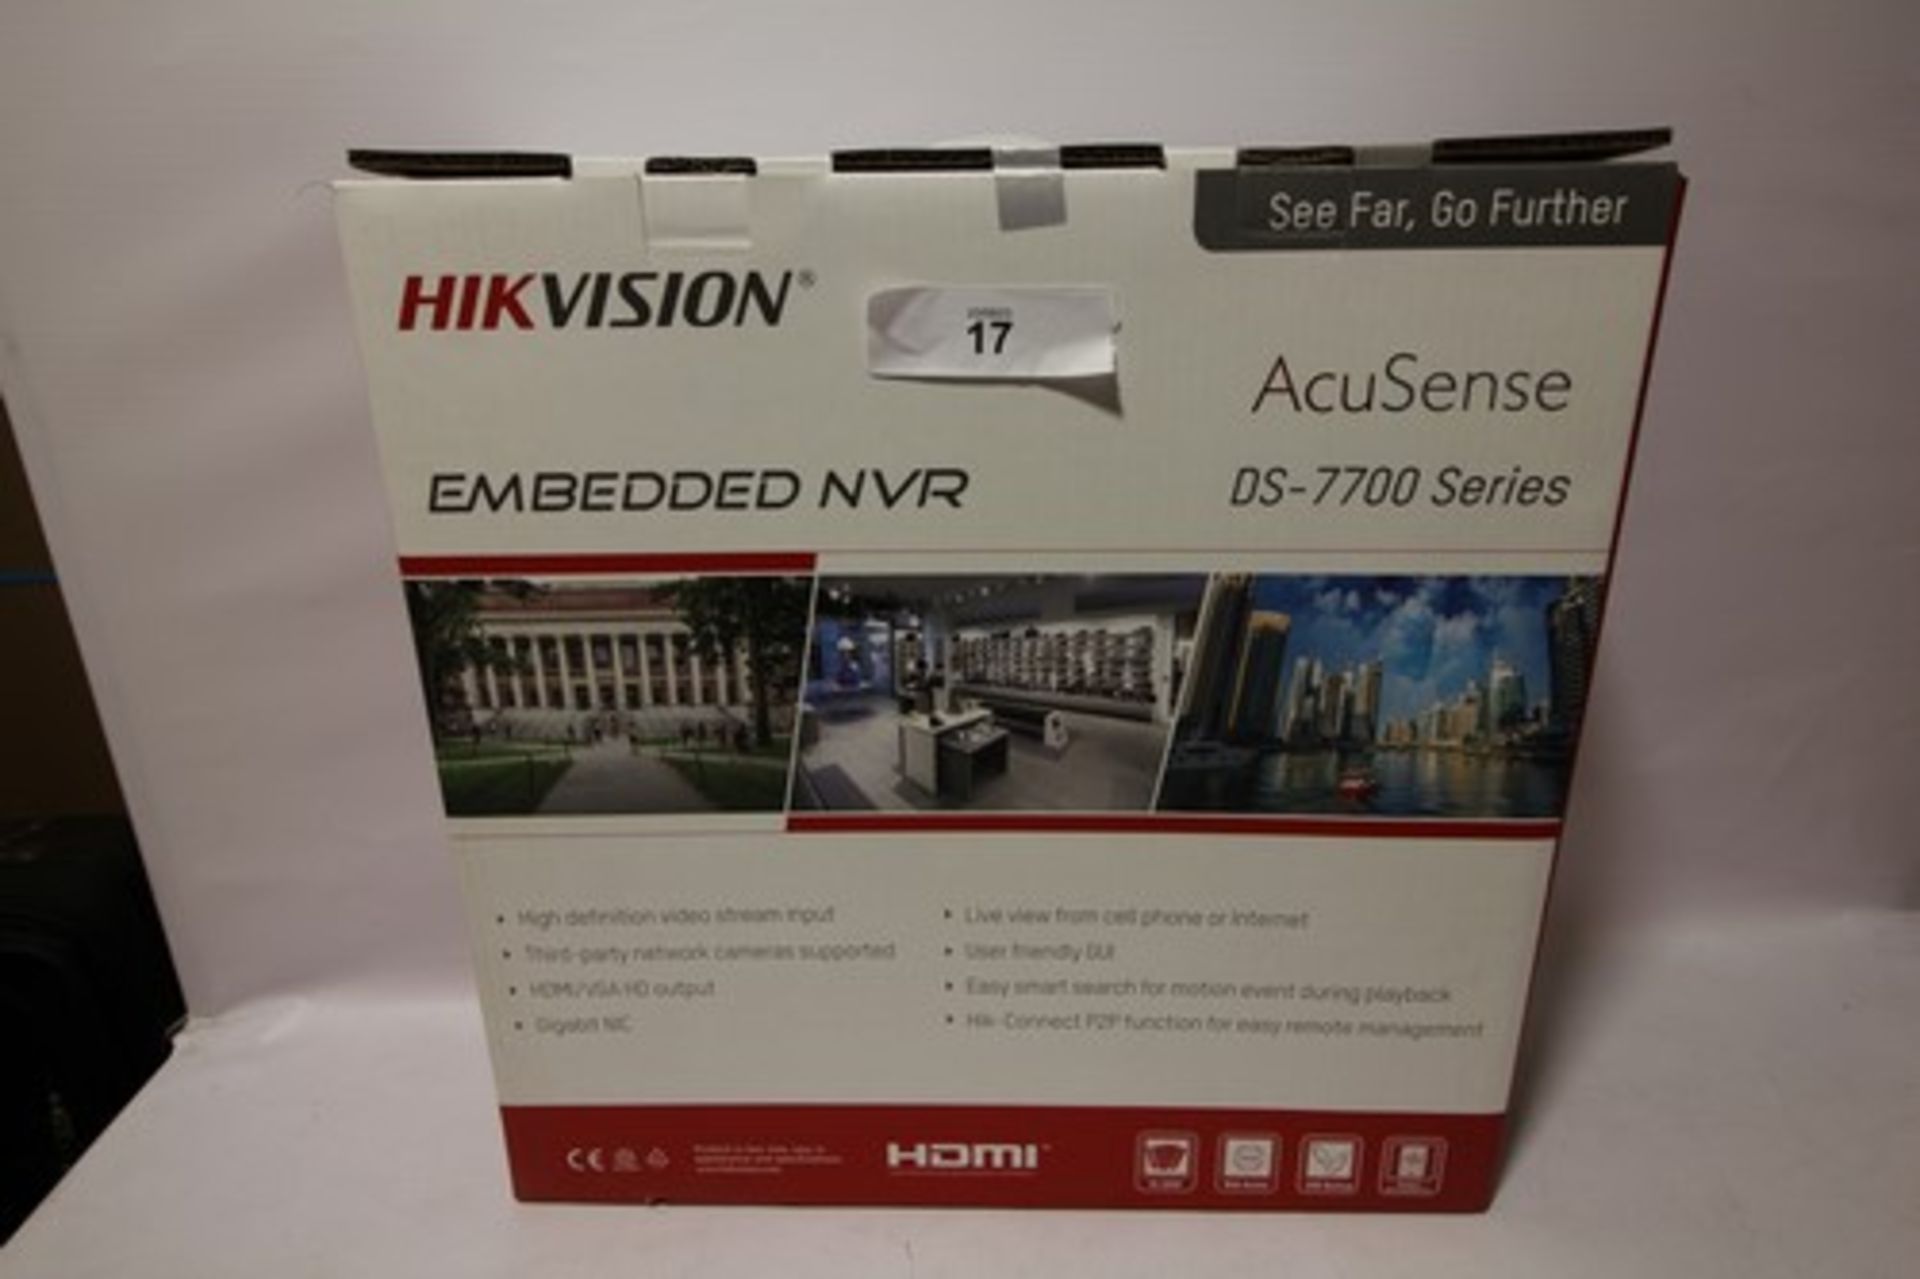 1 x Hikvision Acusense embedded NVR CCTV recorder, model No. DS-7732NXI-K4/16P - sealed new in